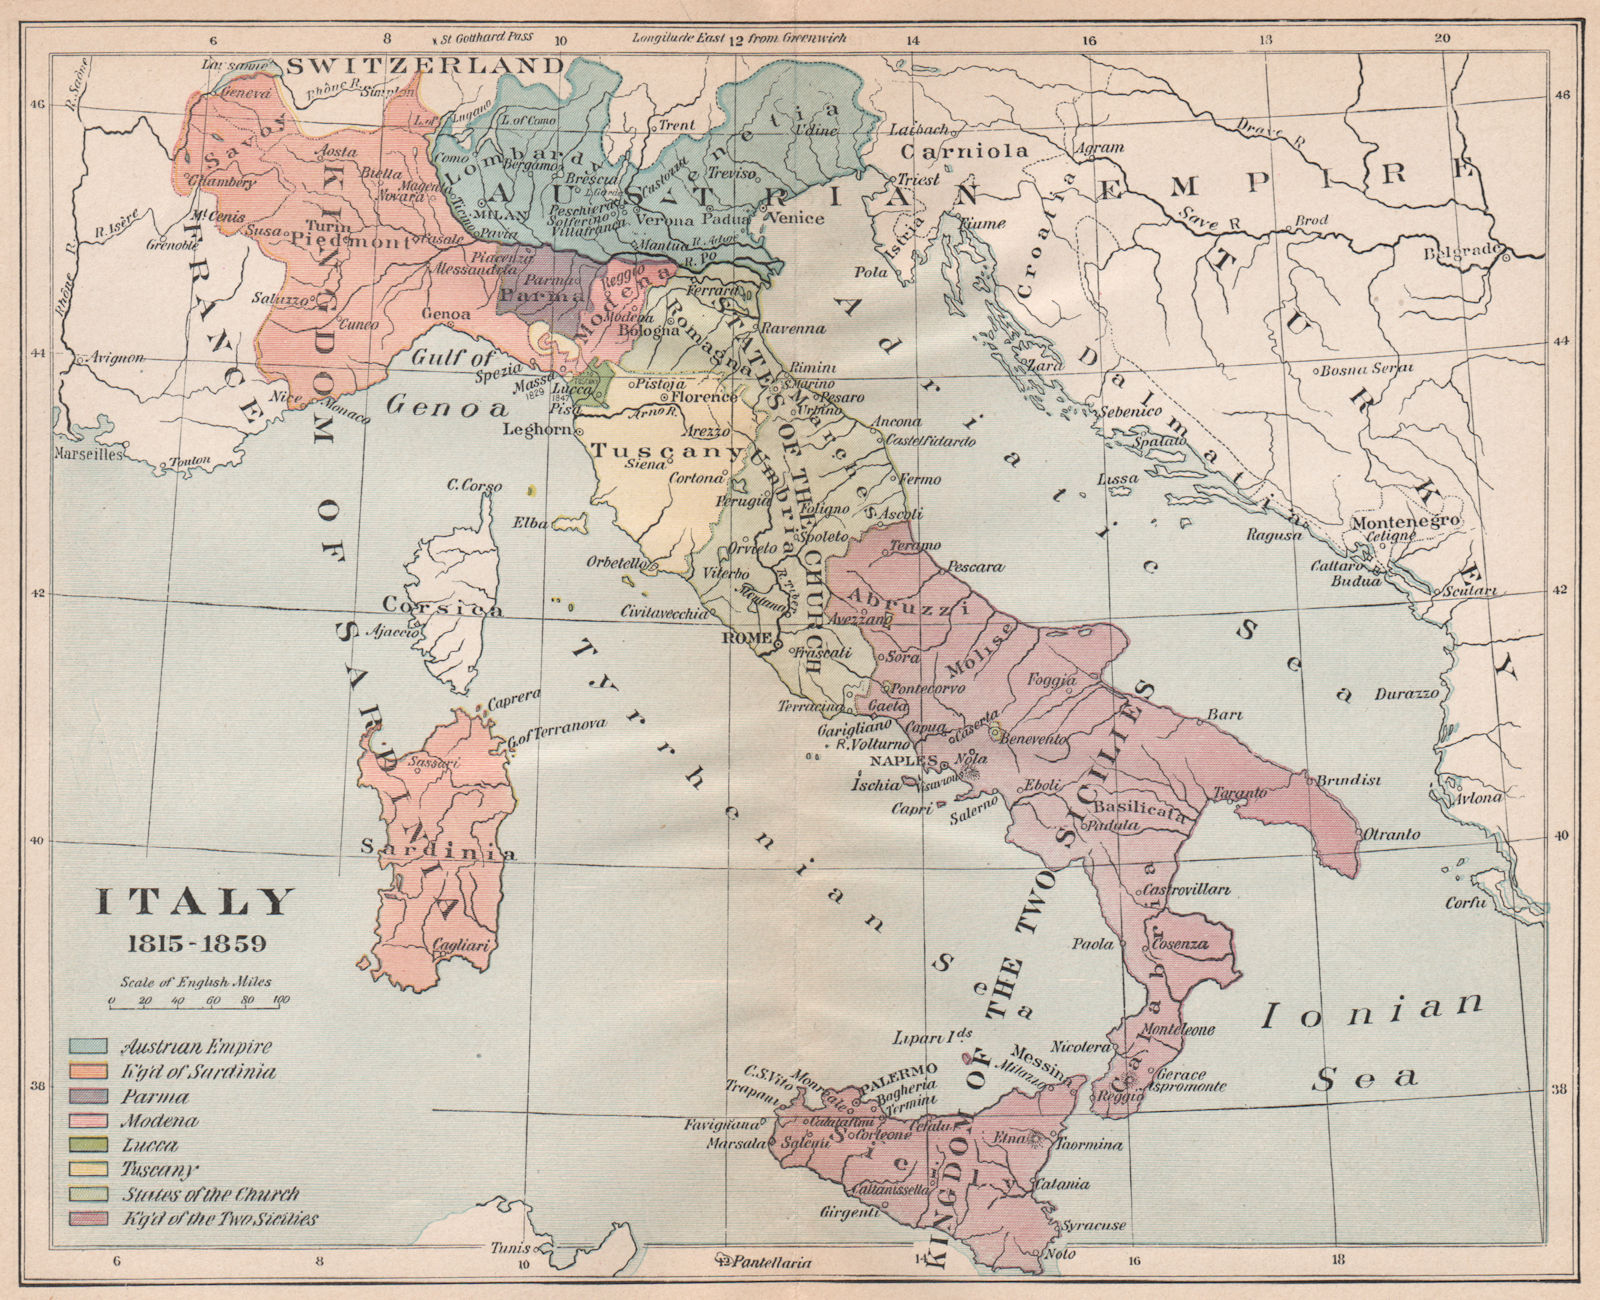 ITALY 1815-1859. Sardinia Parma Two Sicilies Tuscany Papal States Lucca 1917 map